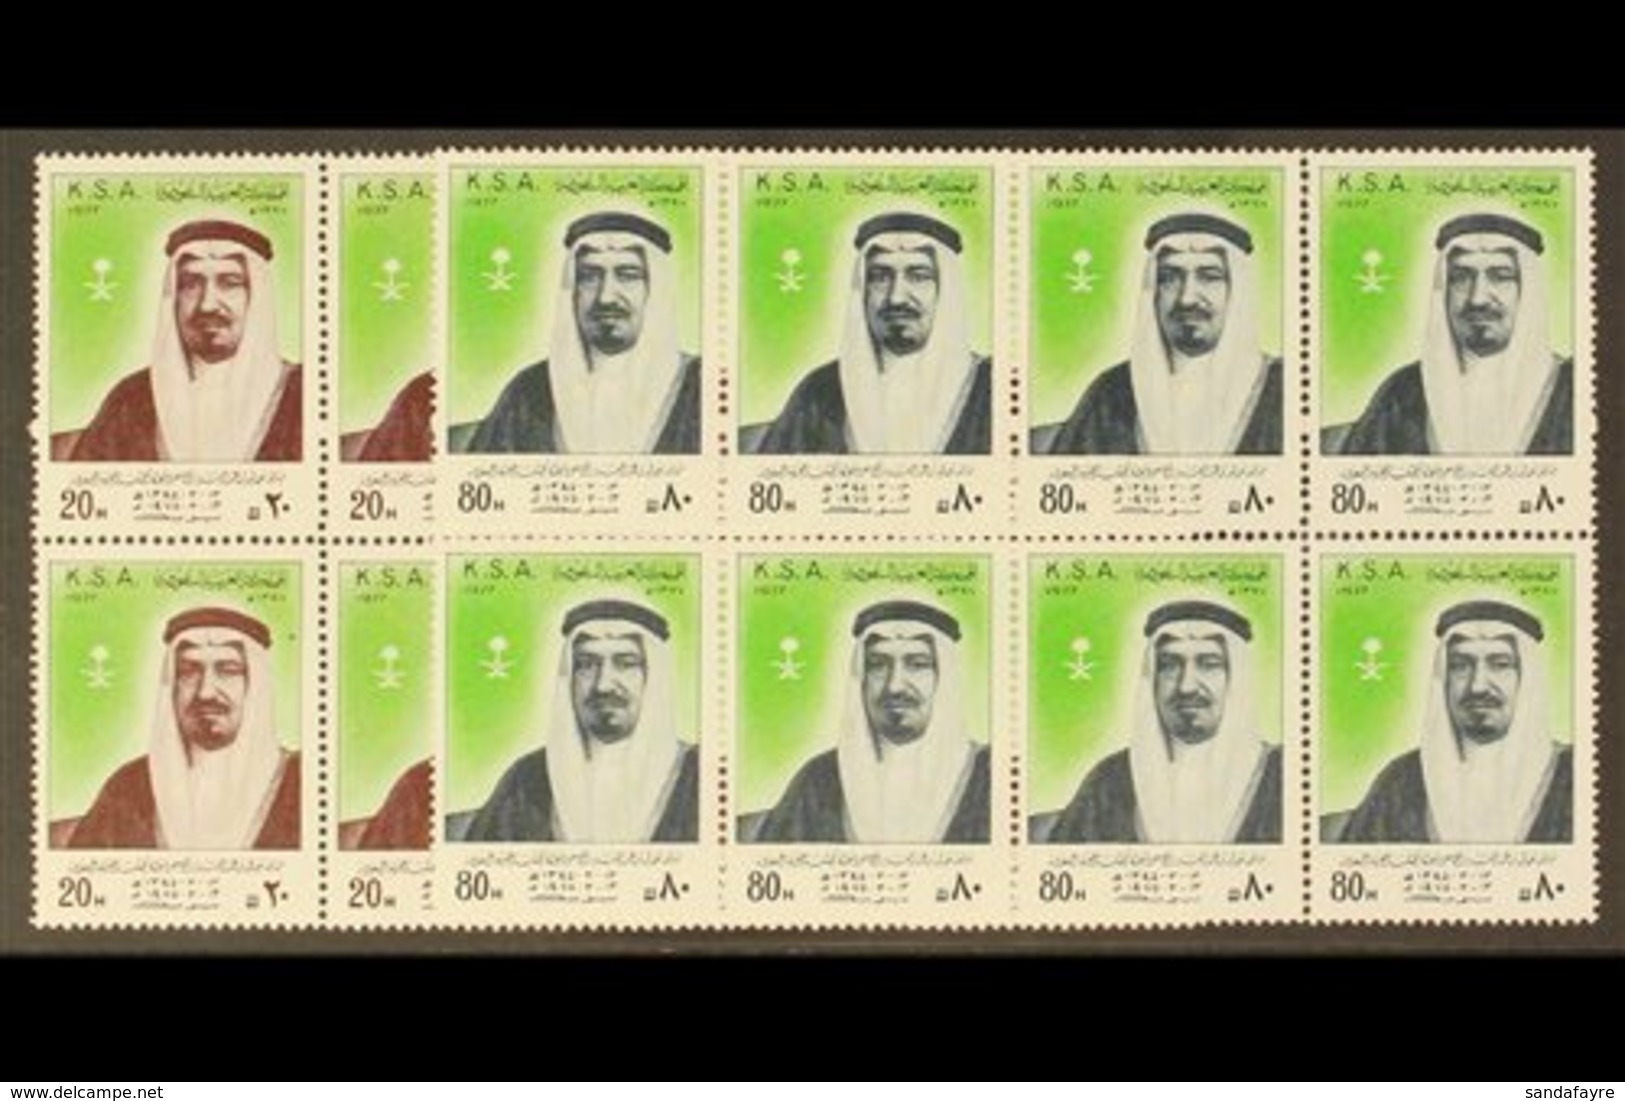 1977 Second Anniversary Of Installation Of King Khalid 20h And 80h With INCORRECT DATES At Foot, SG 1197/1198, With Each - Saoedi-Arabië